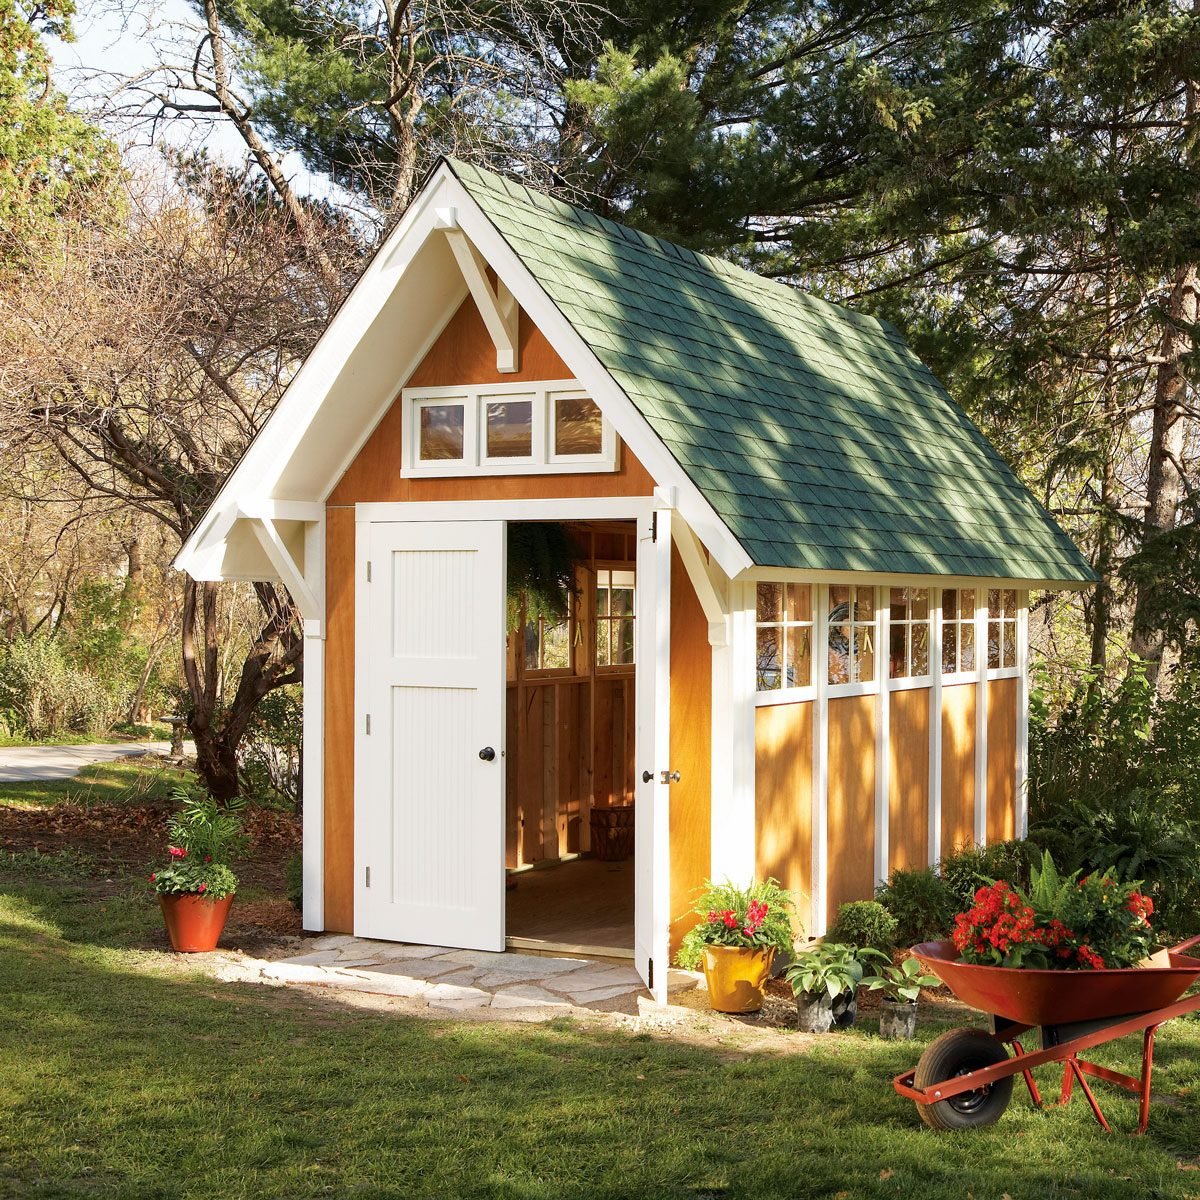 8 Potting Shed Ideas For Gardening All Year Long